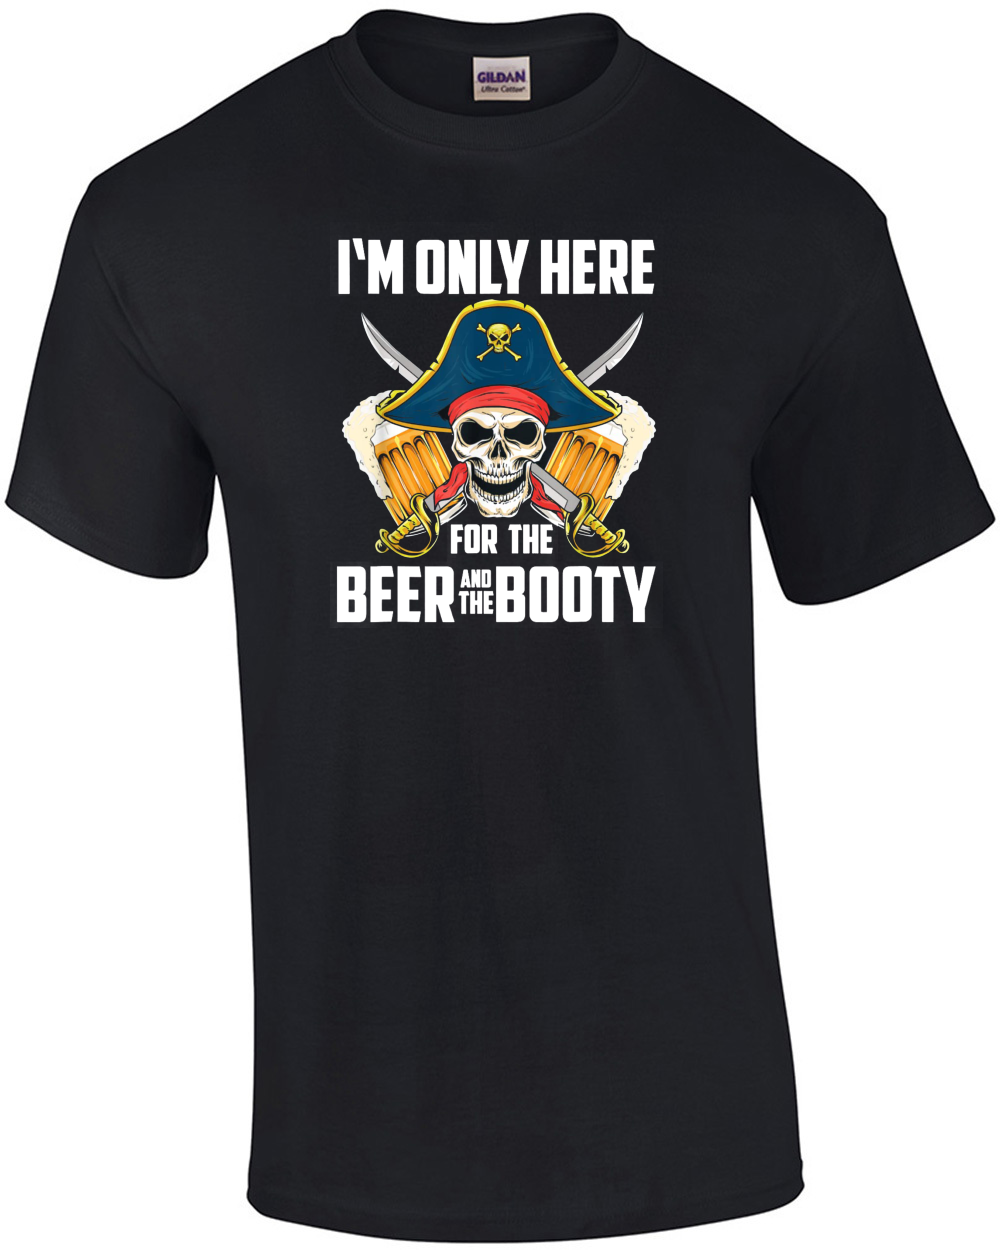 I'm Just Here For The Beer Pirate Booty Skull Pun Drinking T-Shirt